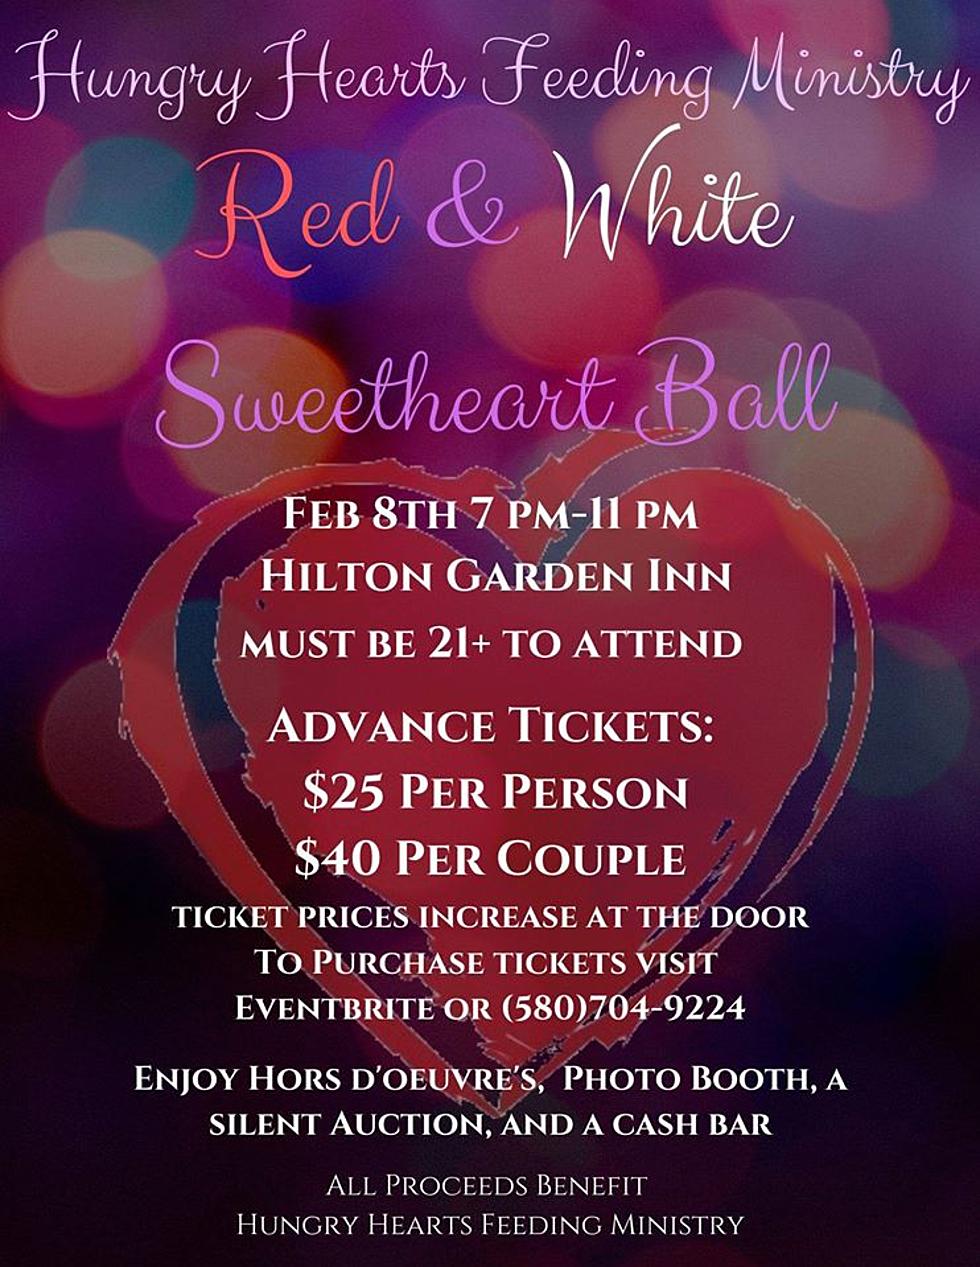 Red & White Sweetheart Ball